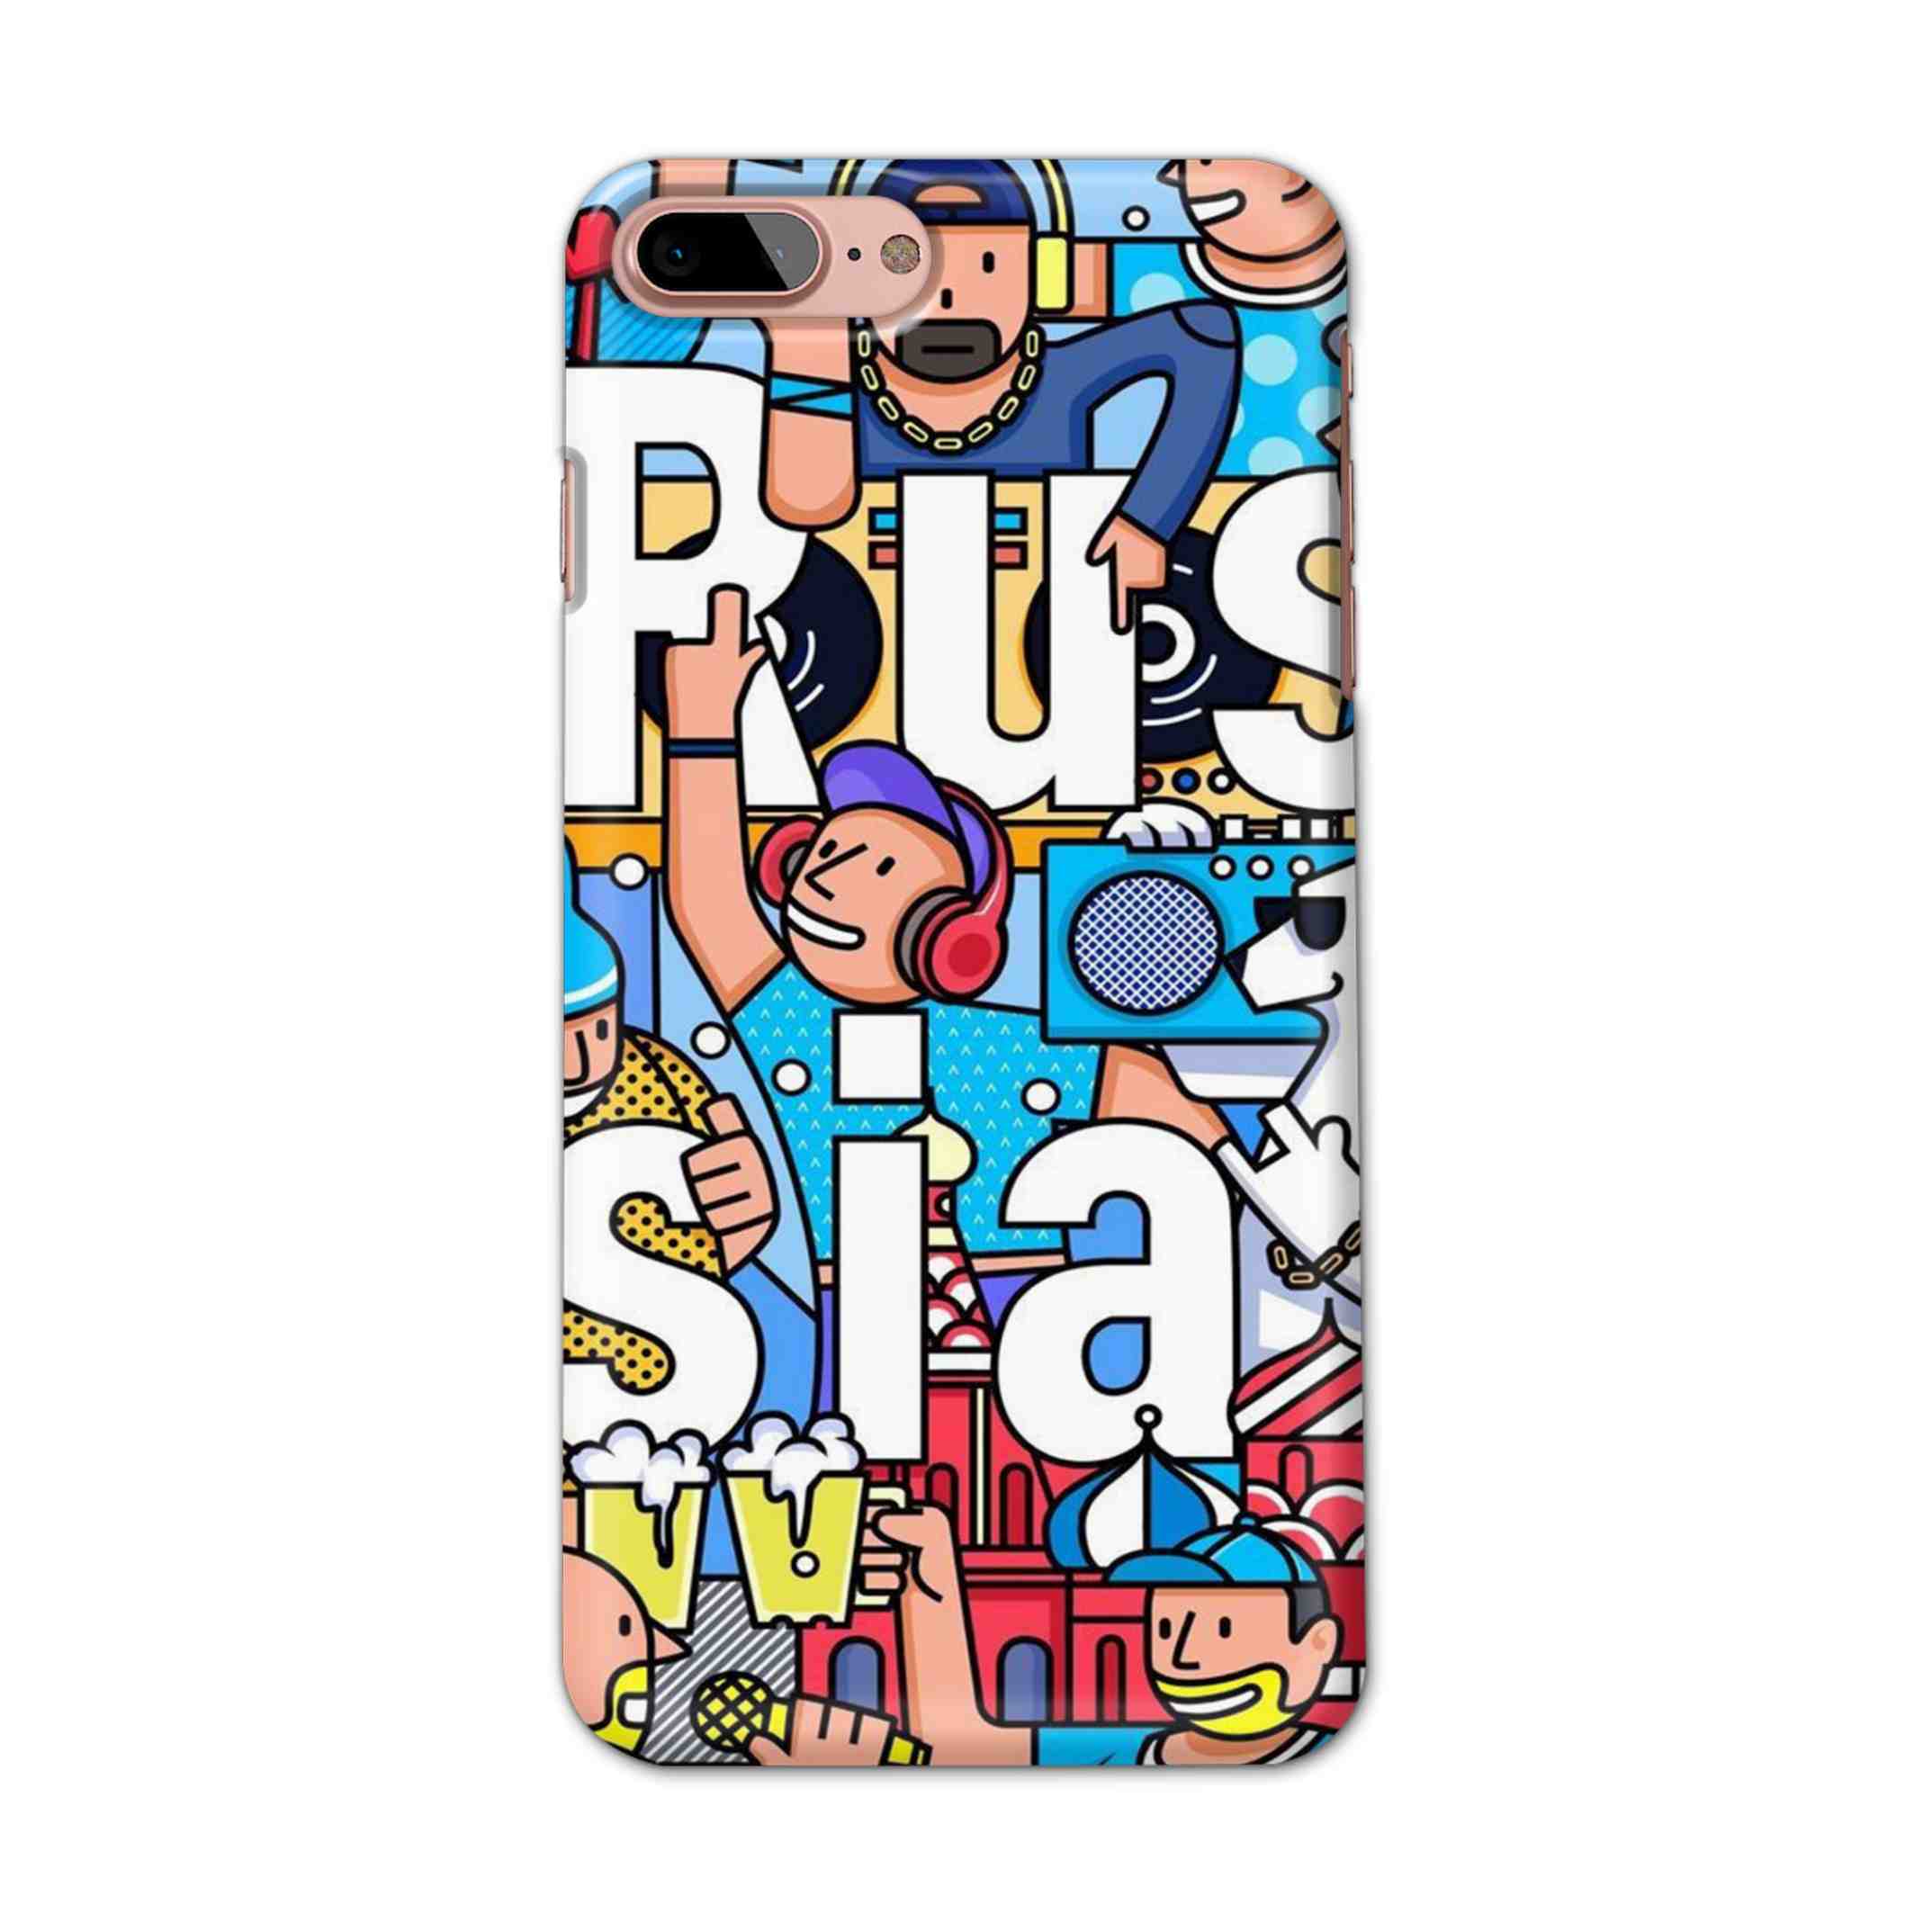 Buy Russia Hard Back Mobile Phone Case/Cover For iPhone 7 Plus / 8 Plus Online